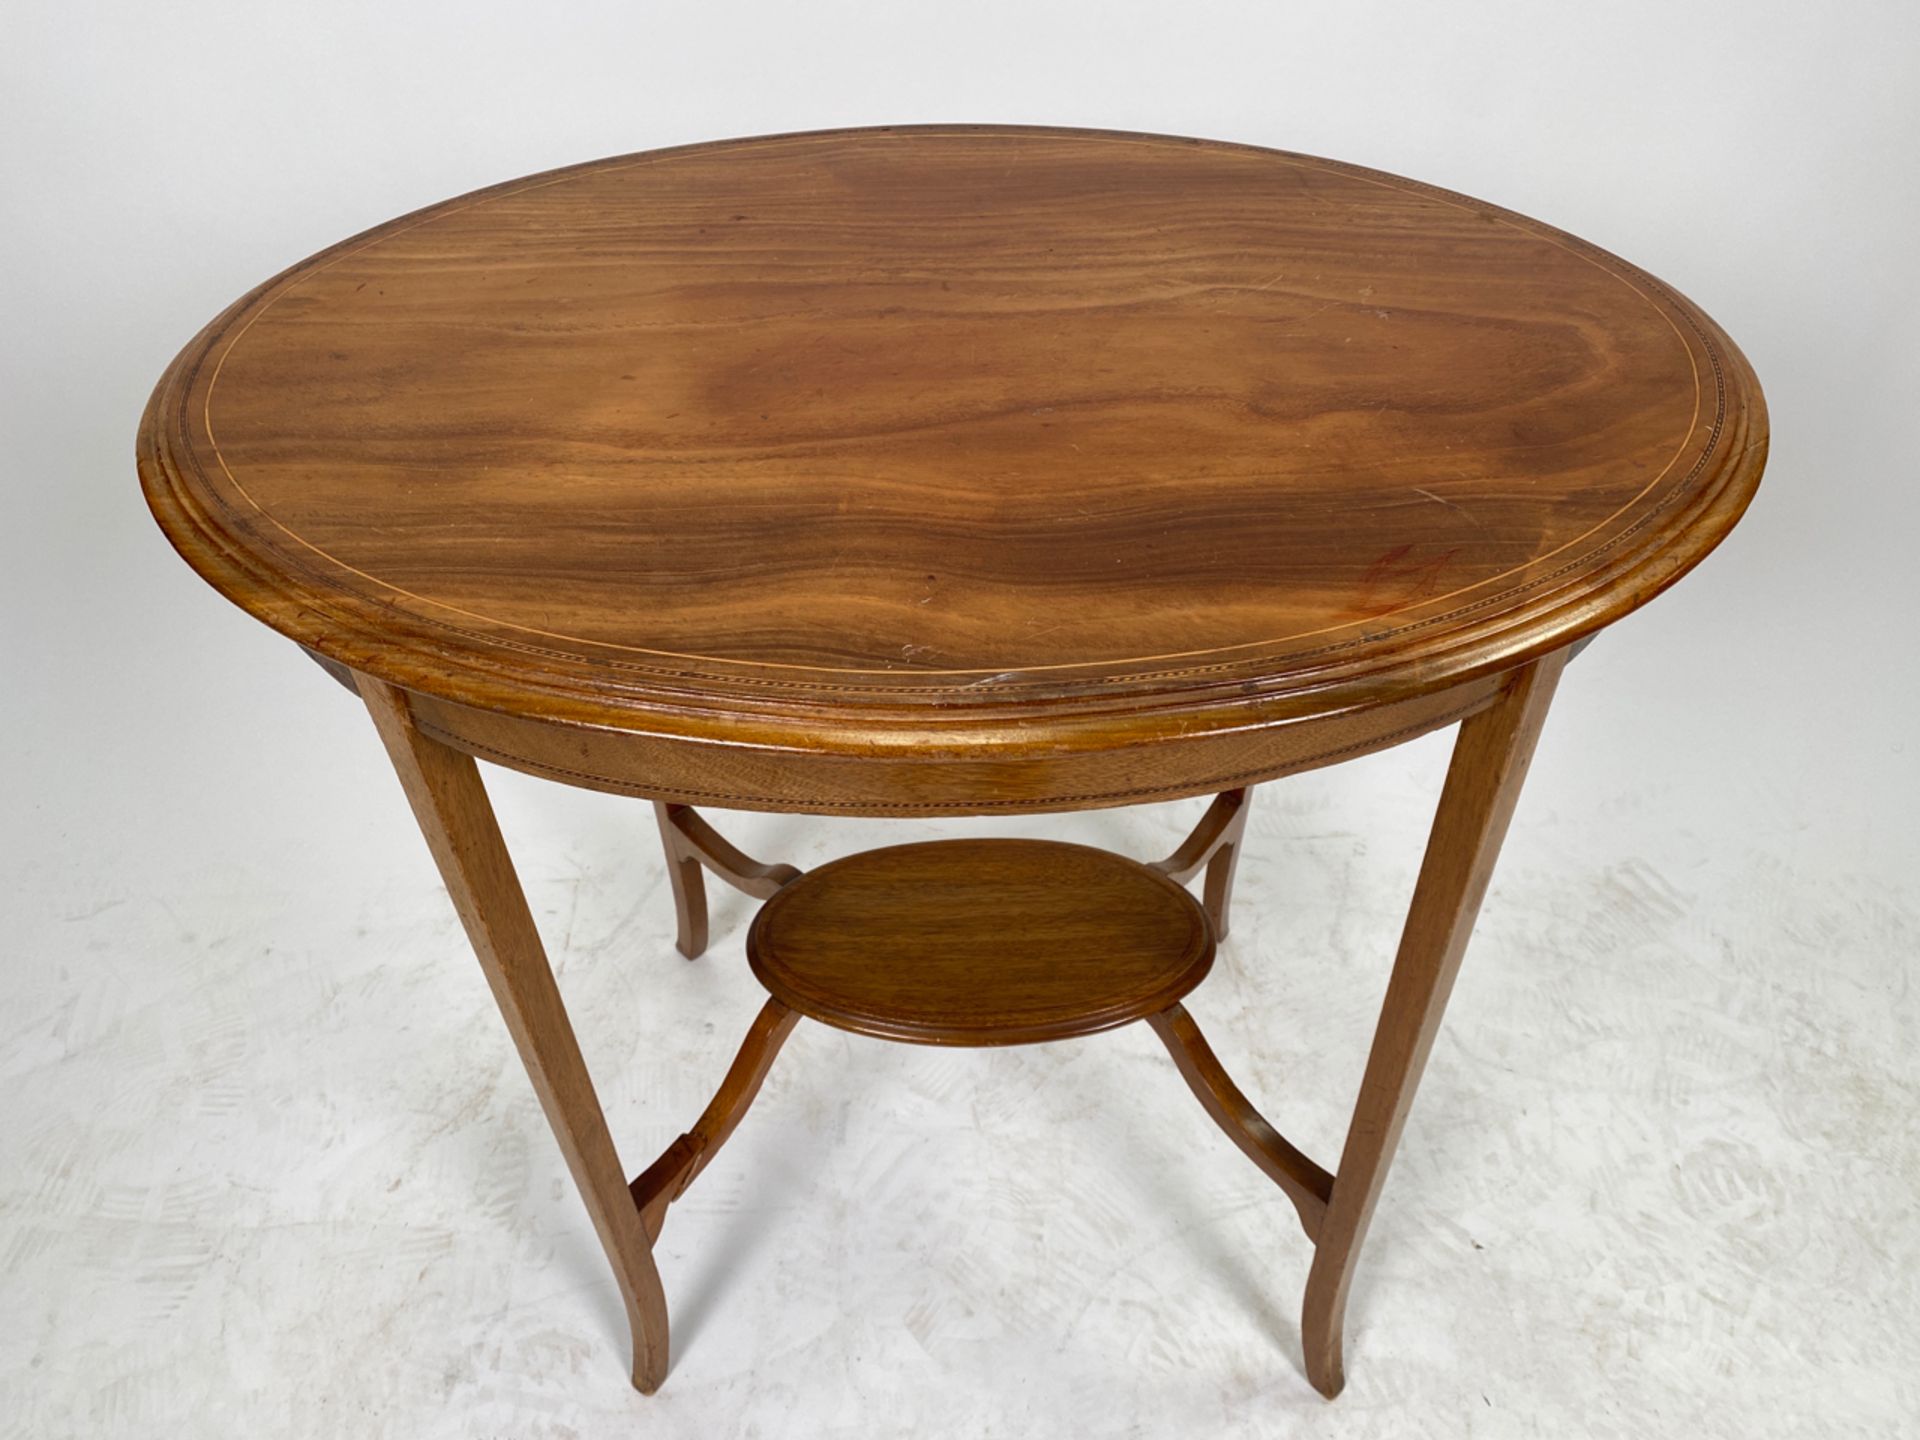 Edwardian Inlaid Side Table Property of the Savoy Group